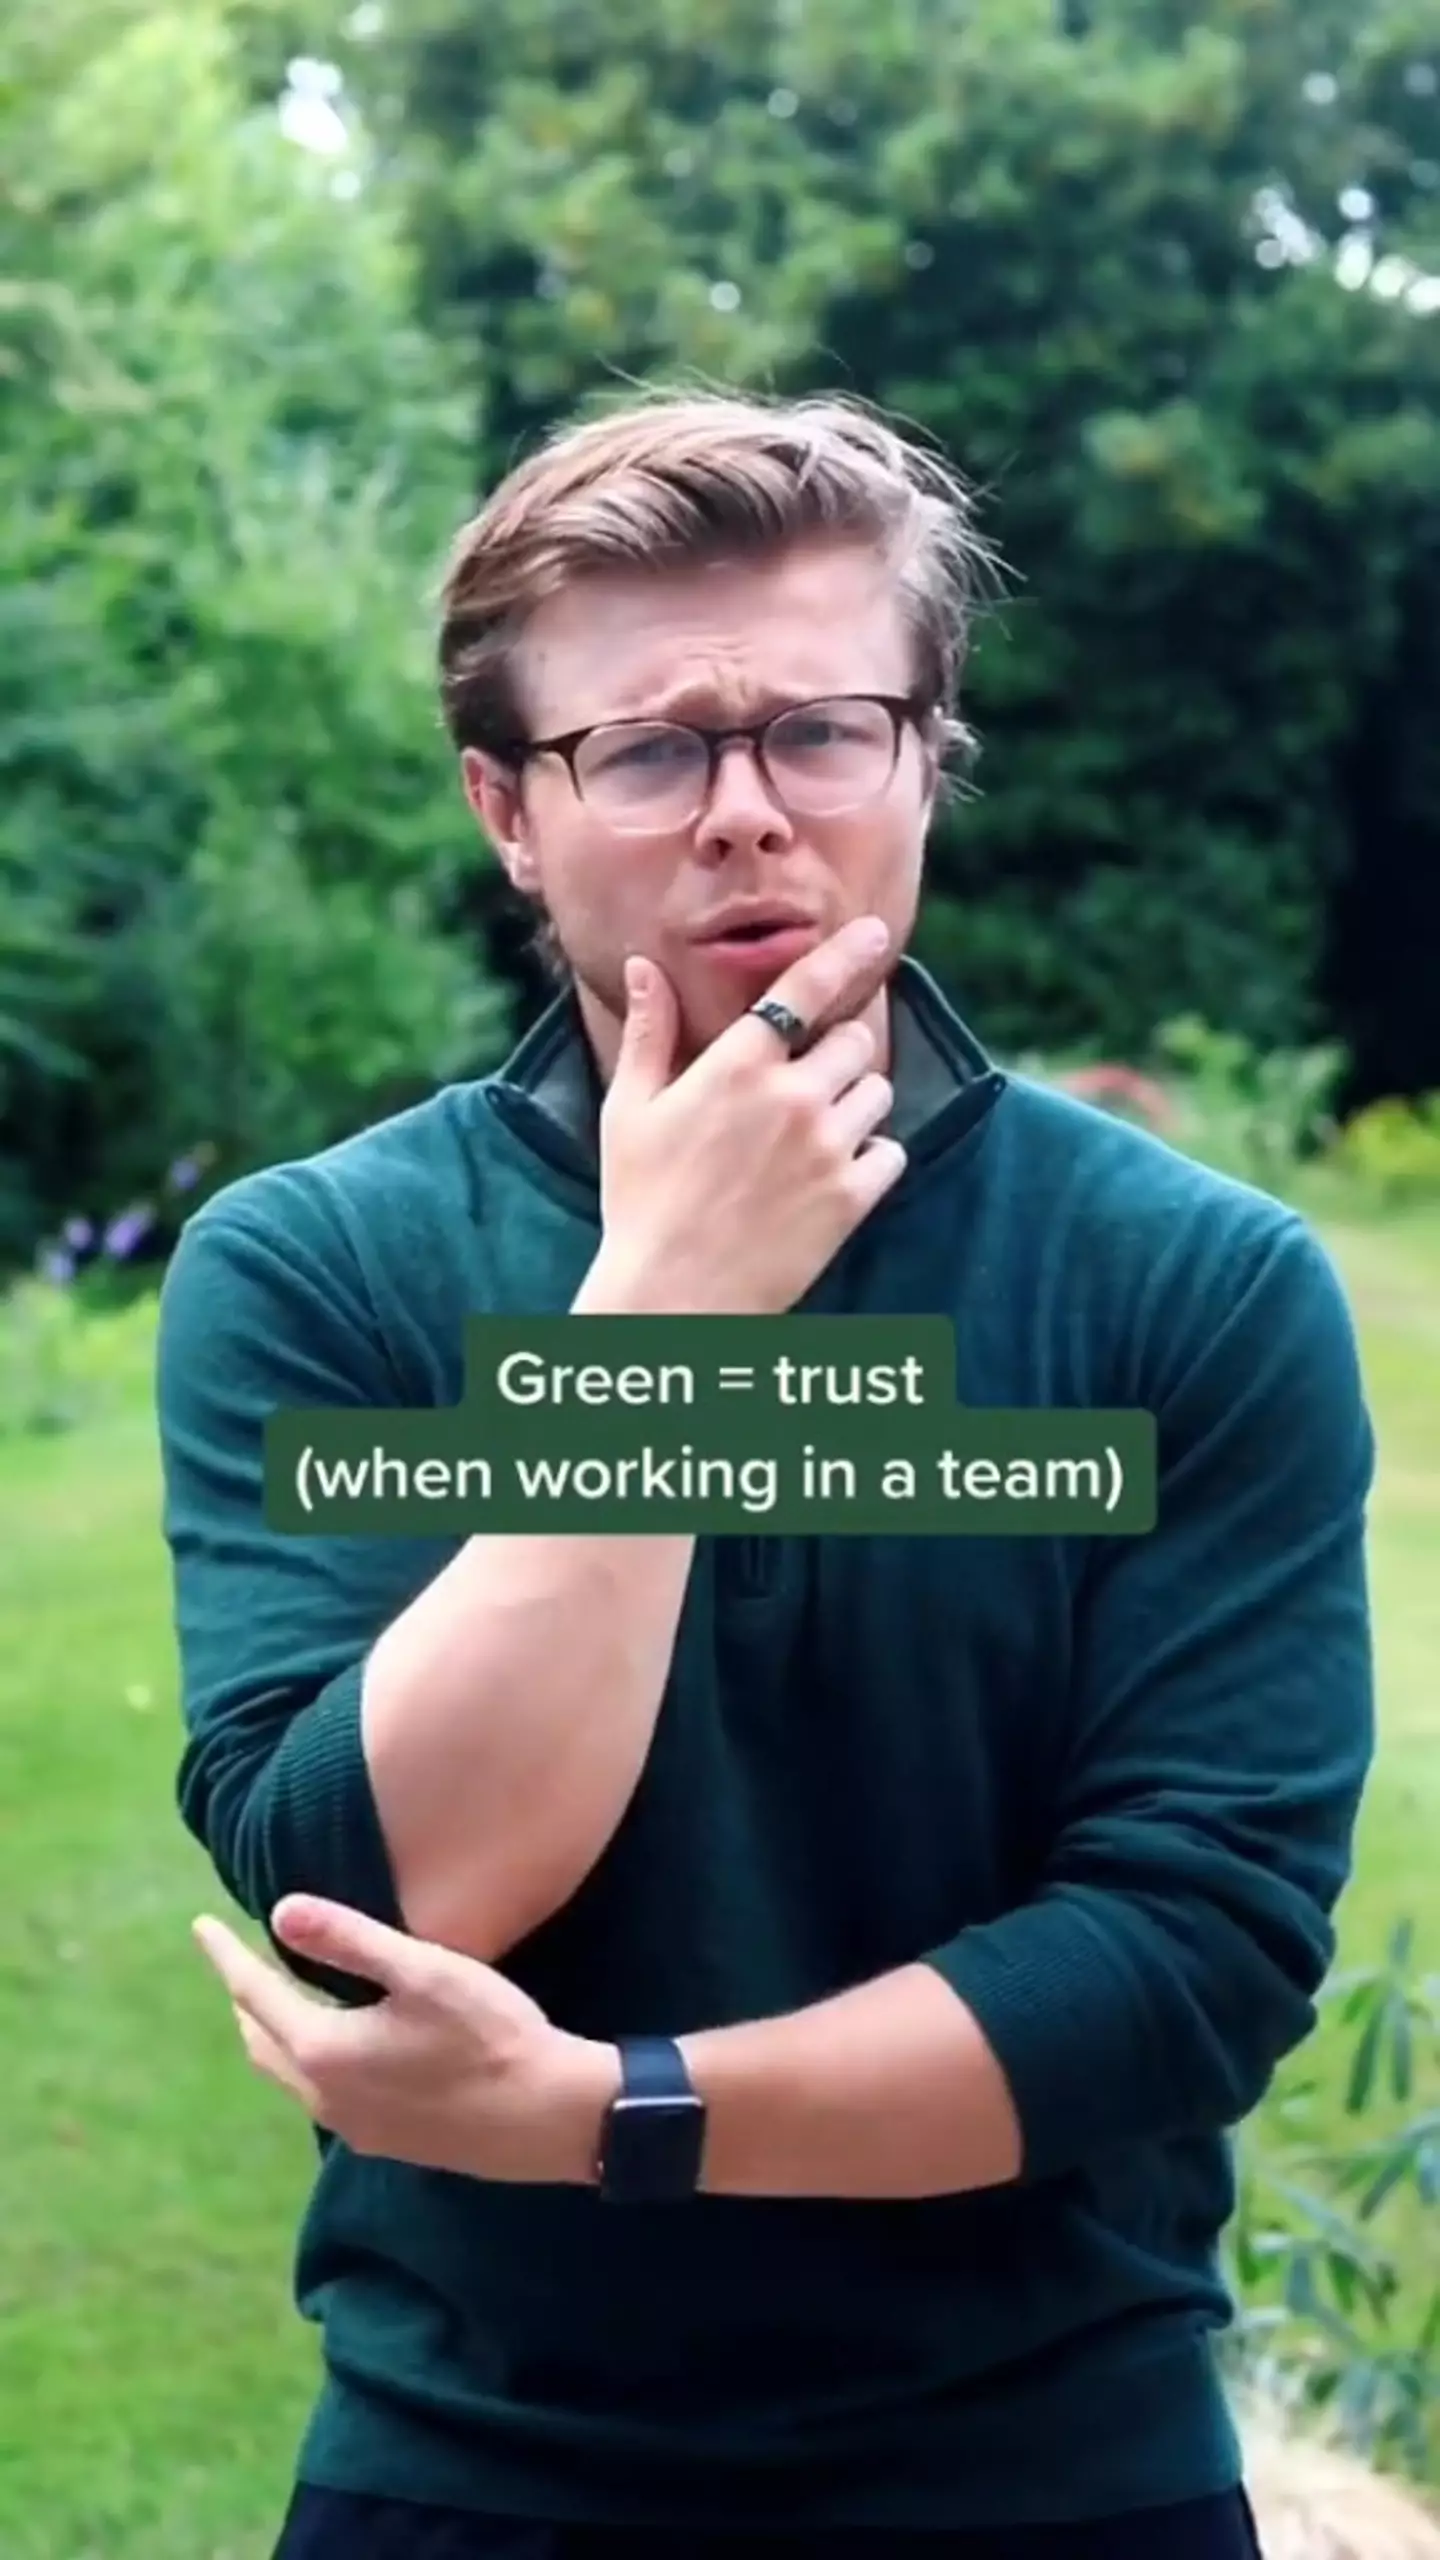 According to the TikToker, green is a colour that represents trust.